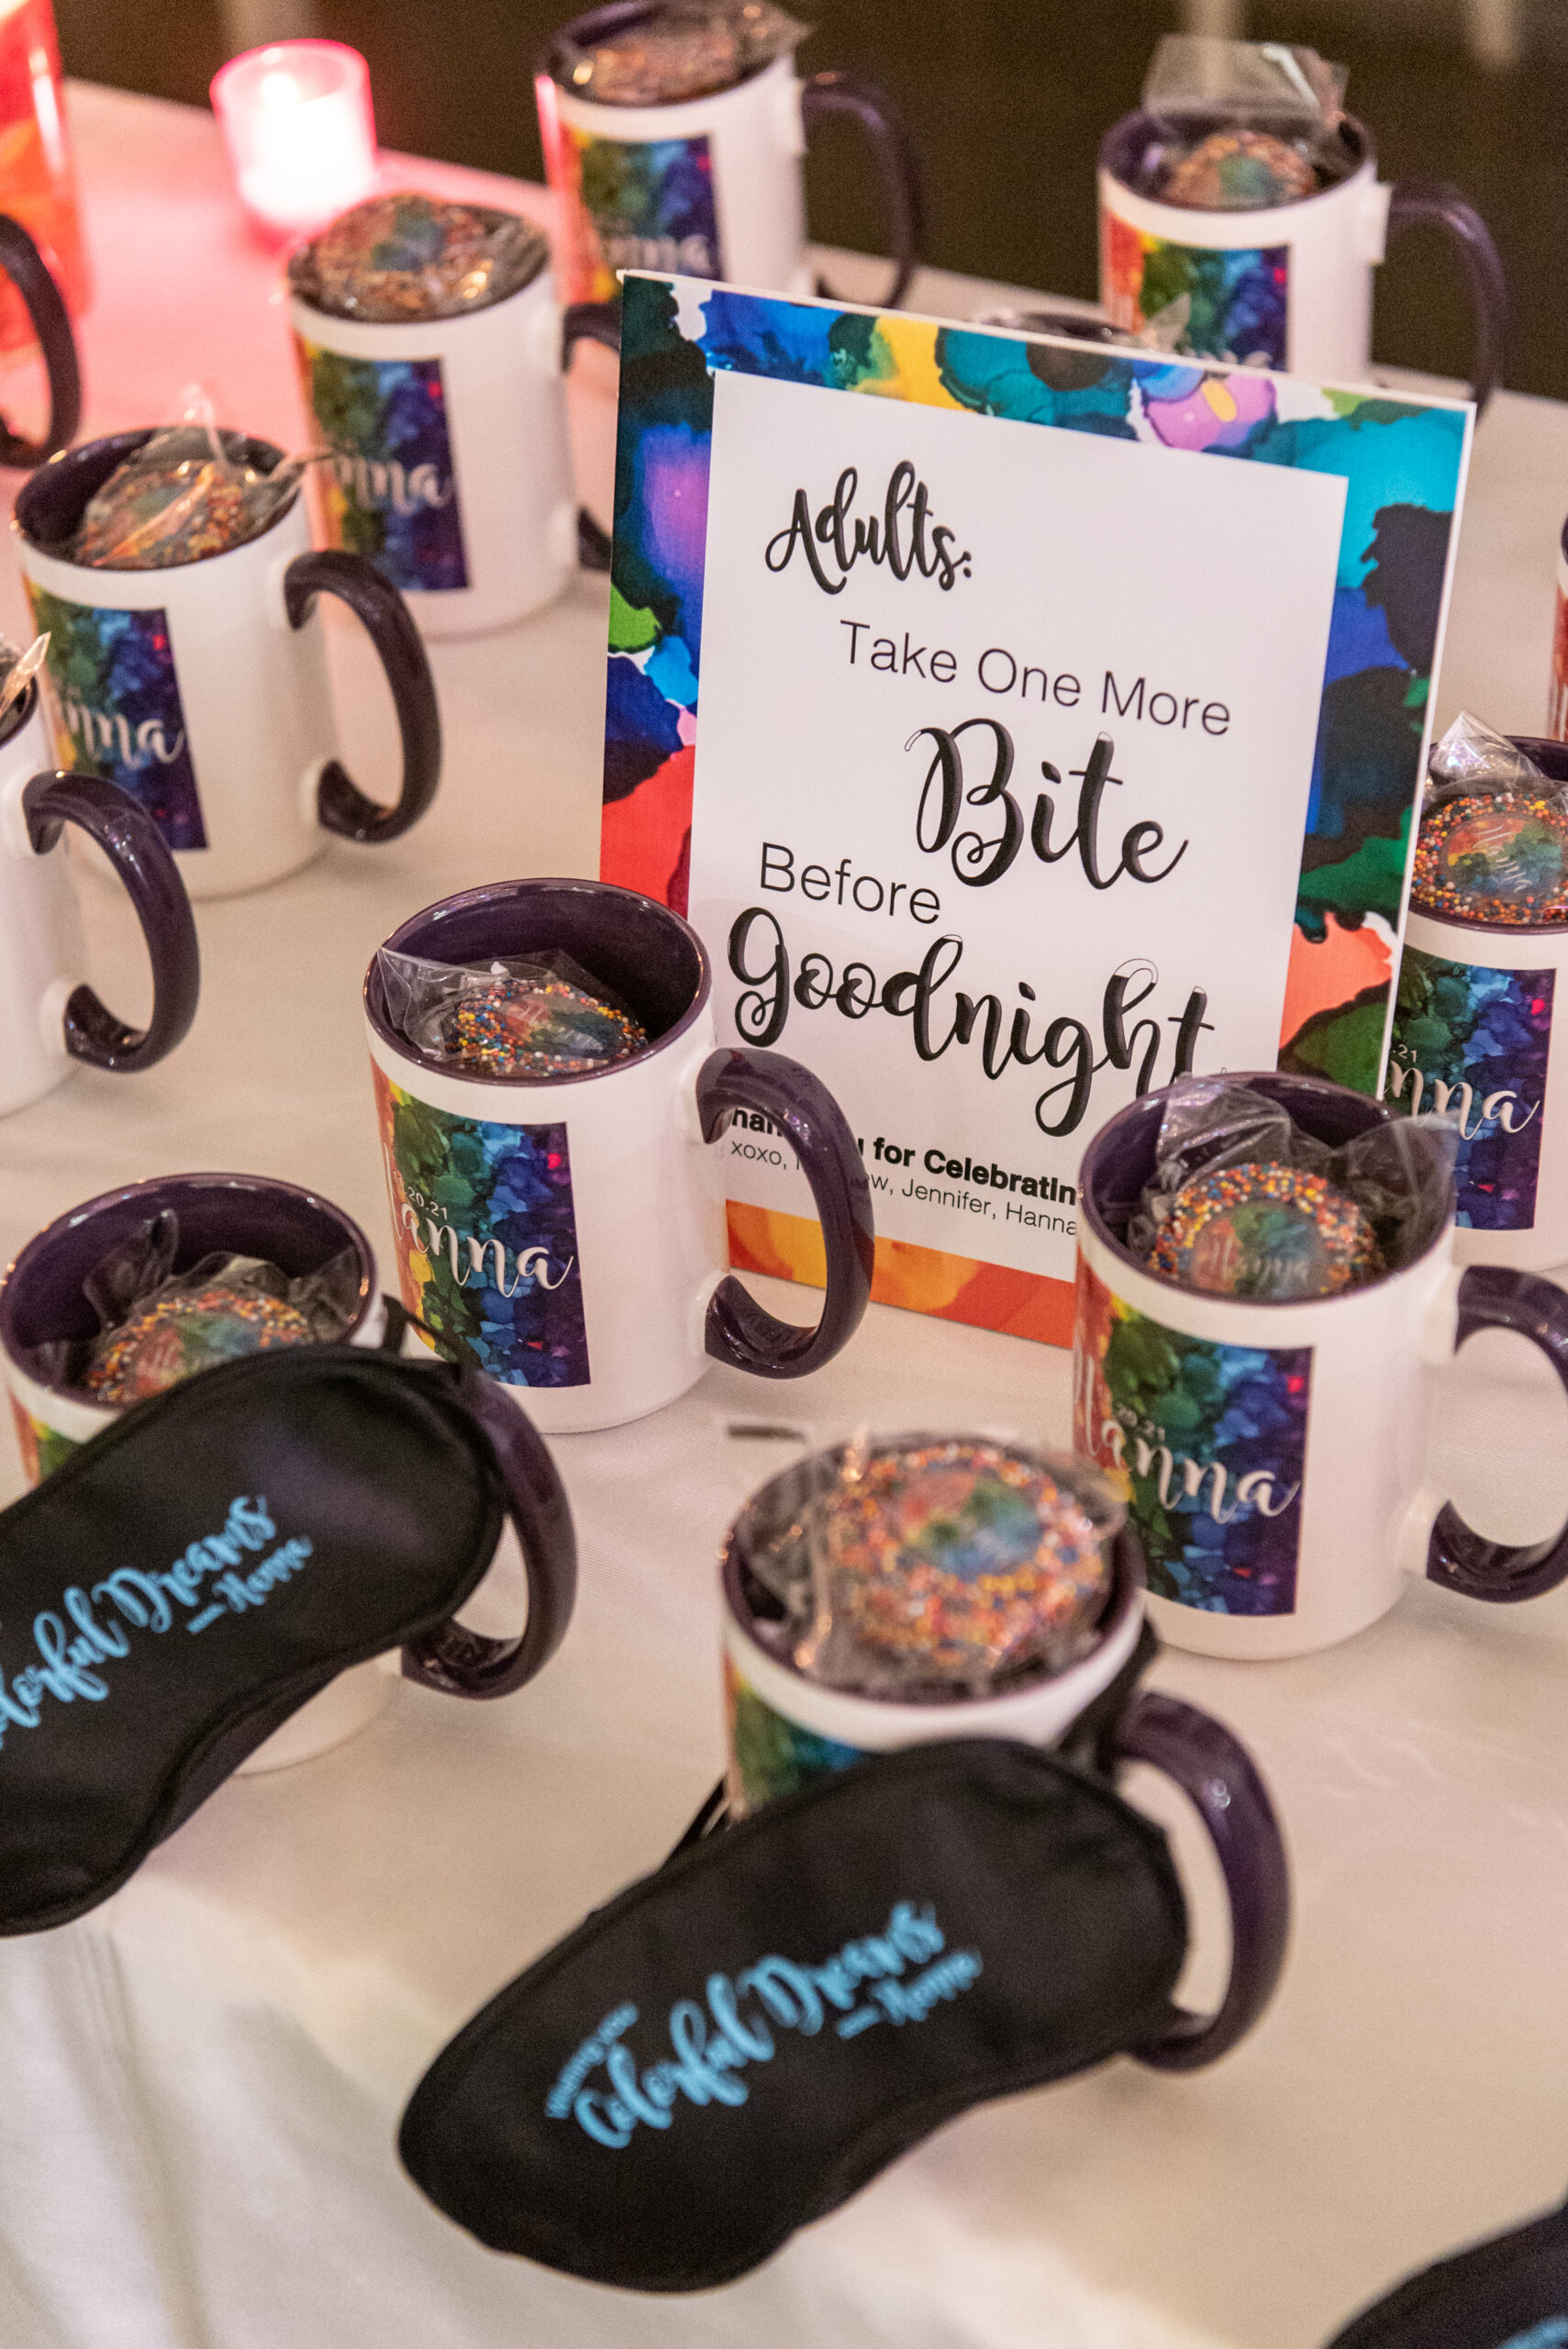 Coffee mugs with treats | Pop Color Events | Adding a Pop of Color to Bar & Bat Mitzvahs in DC, MD & VA | Photo by: Greg Land